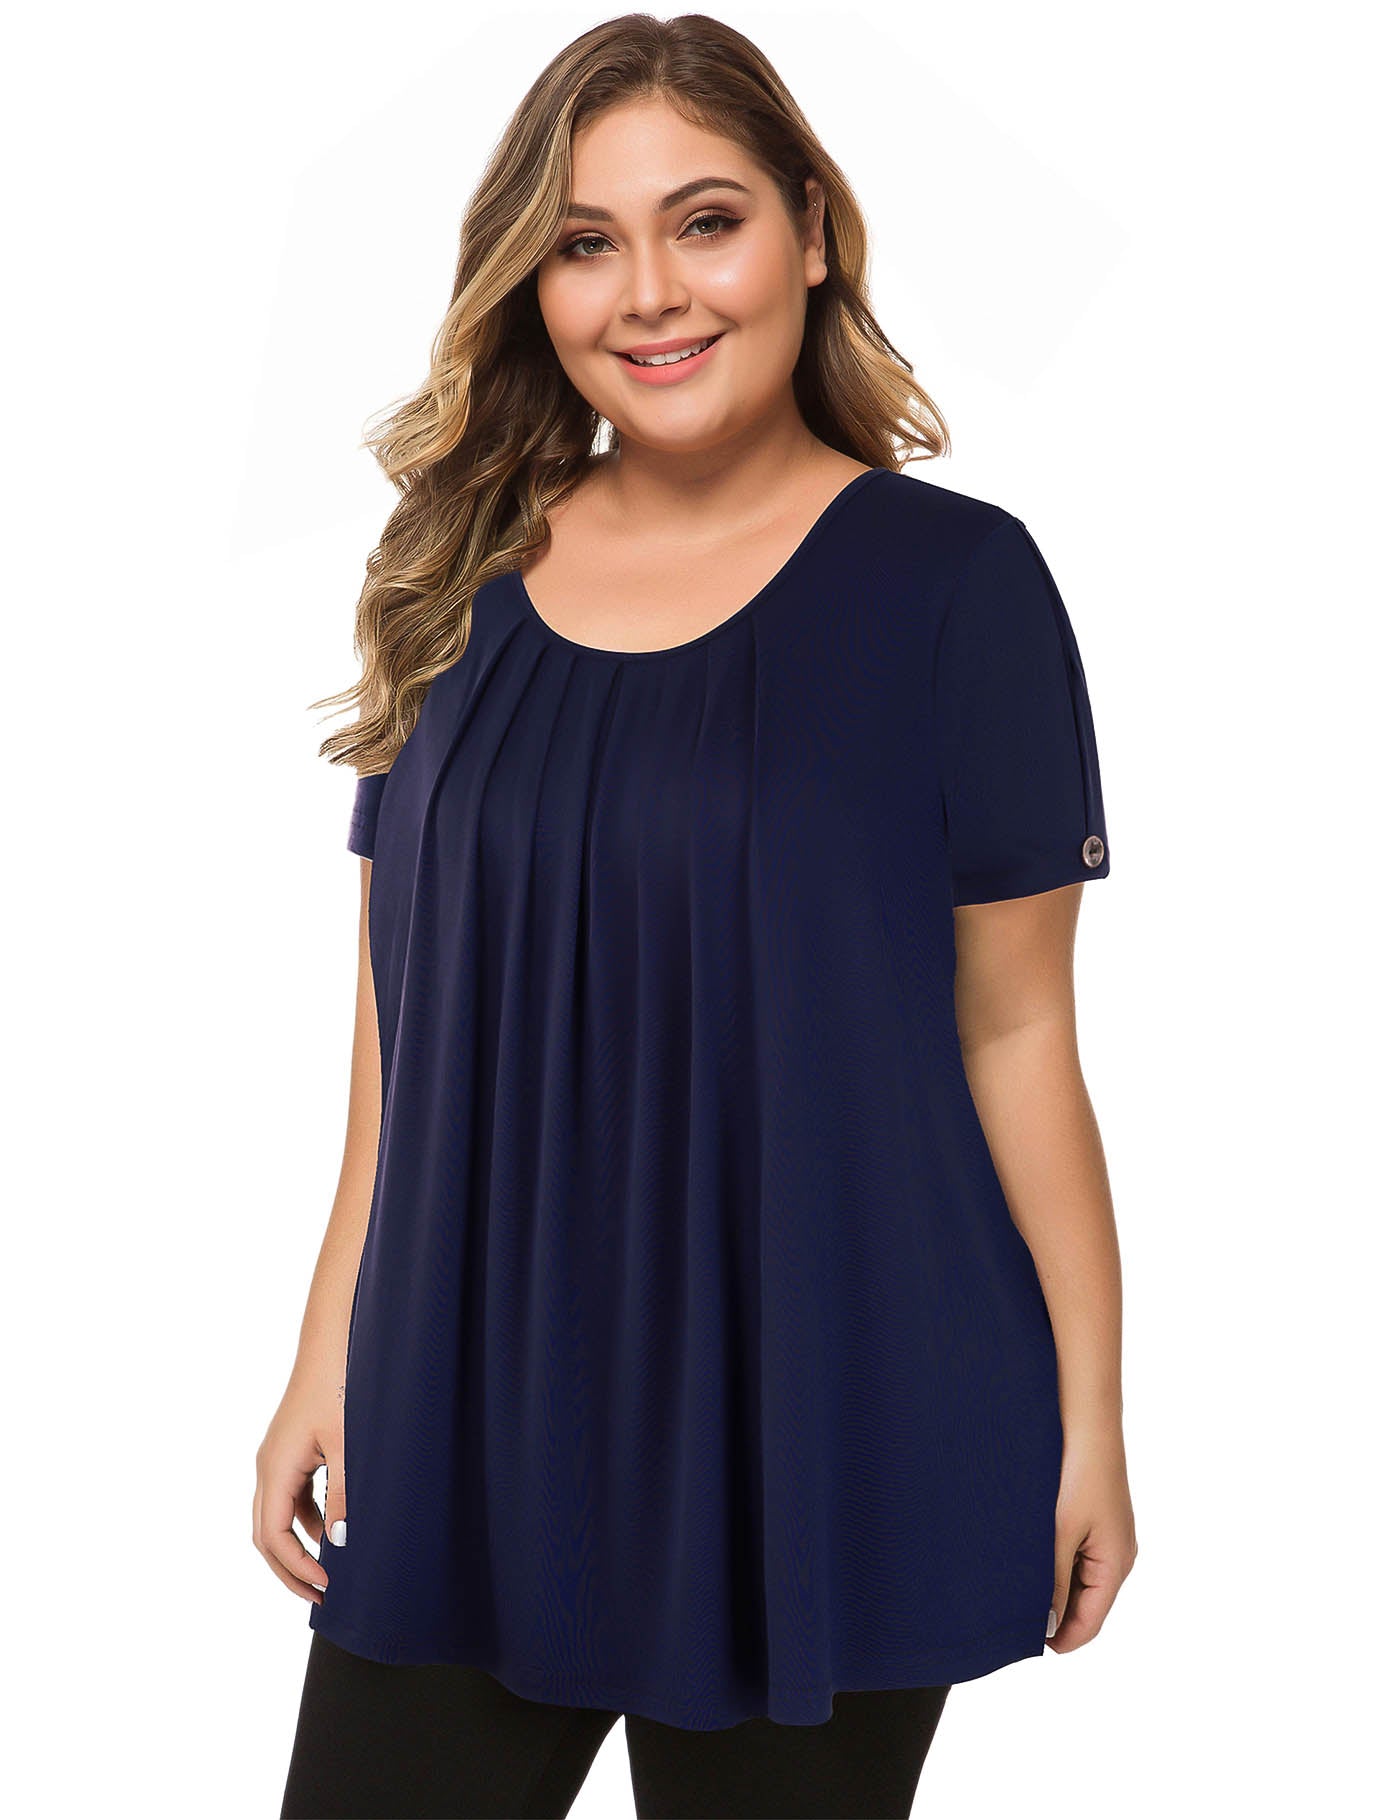 Plus Size Tops for Women Short Sleeve Tunic Tops Hide Belly Shirts